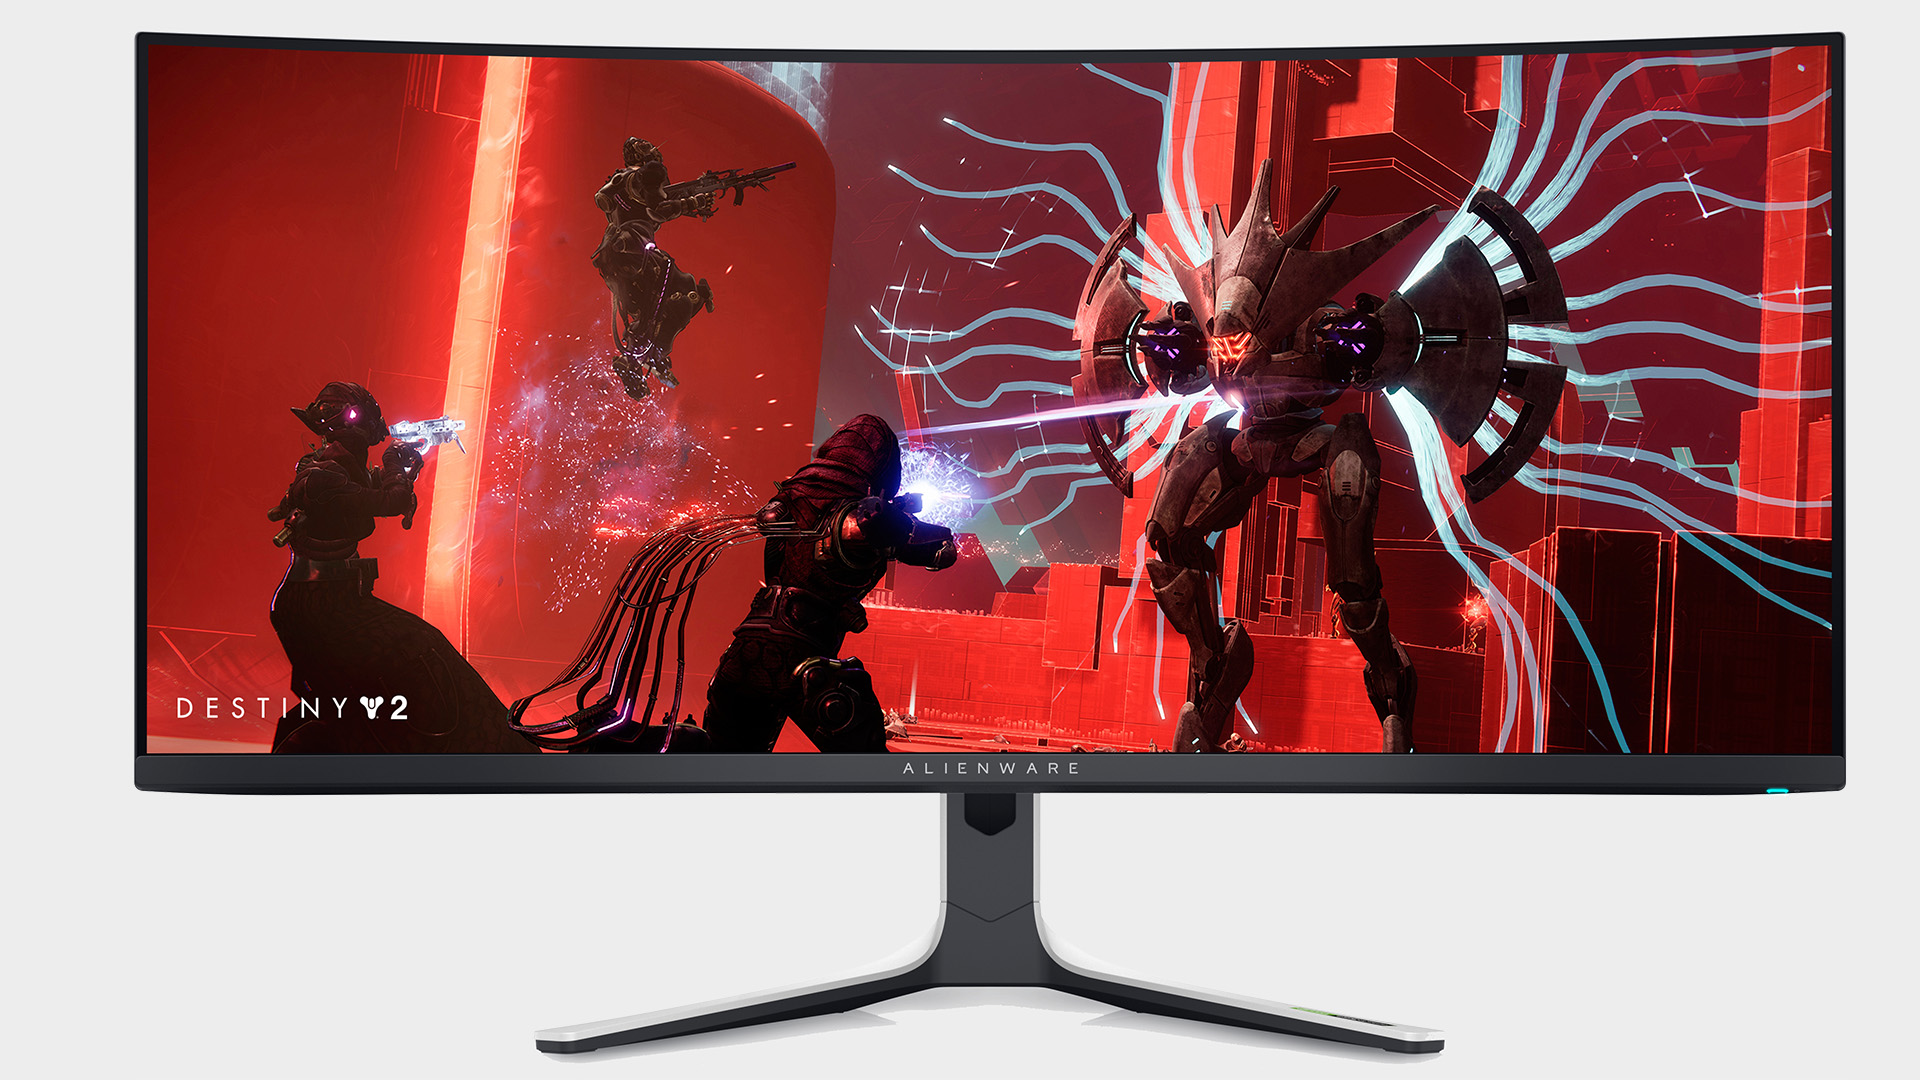 ALIENWARE 34 CURVED QD-OLED GAMING MONITOR - AW3423DW with Destiny 2 on-screen